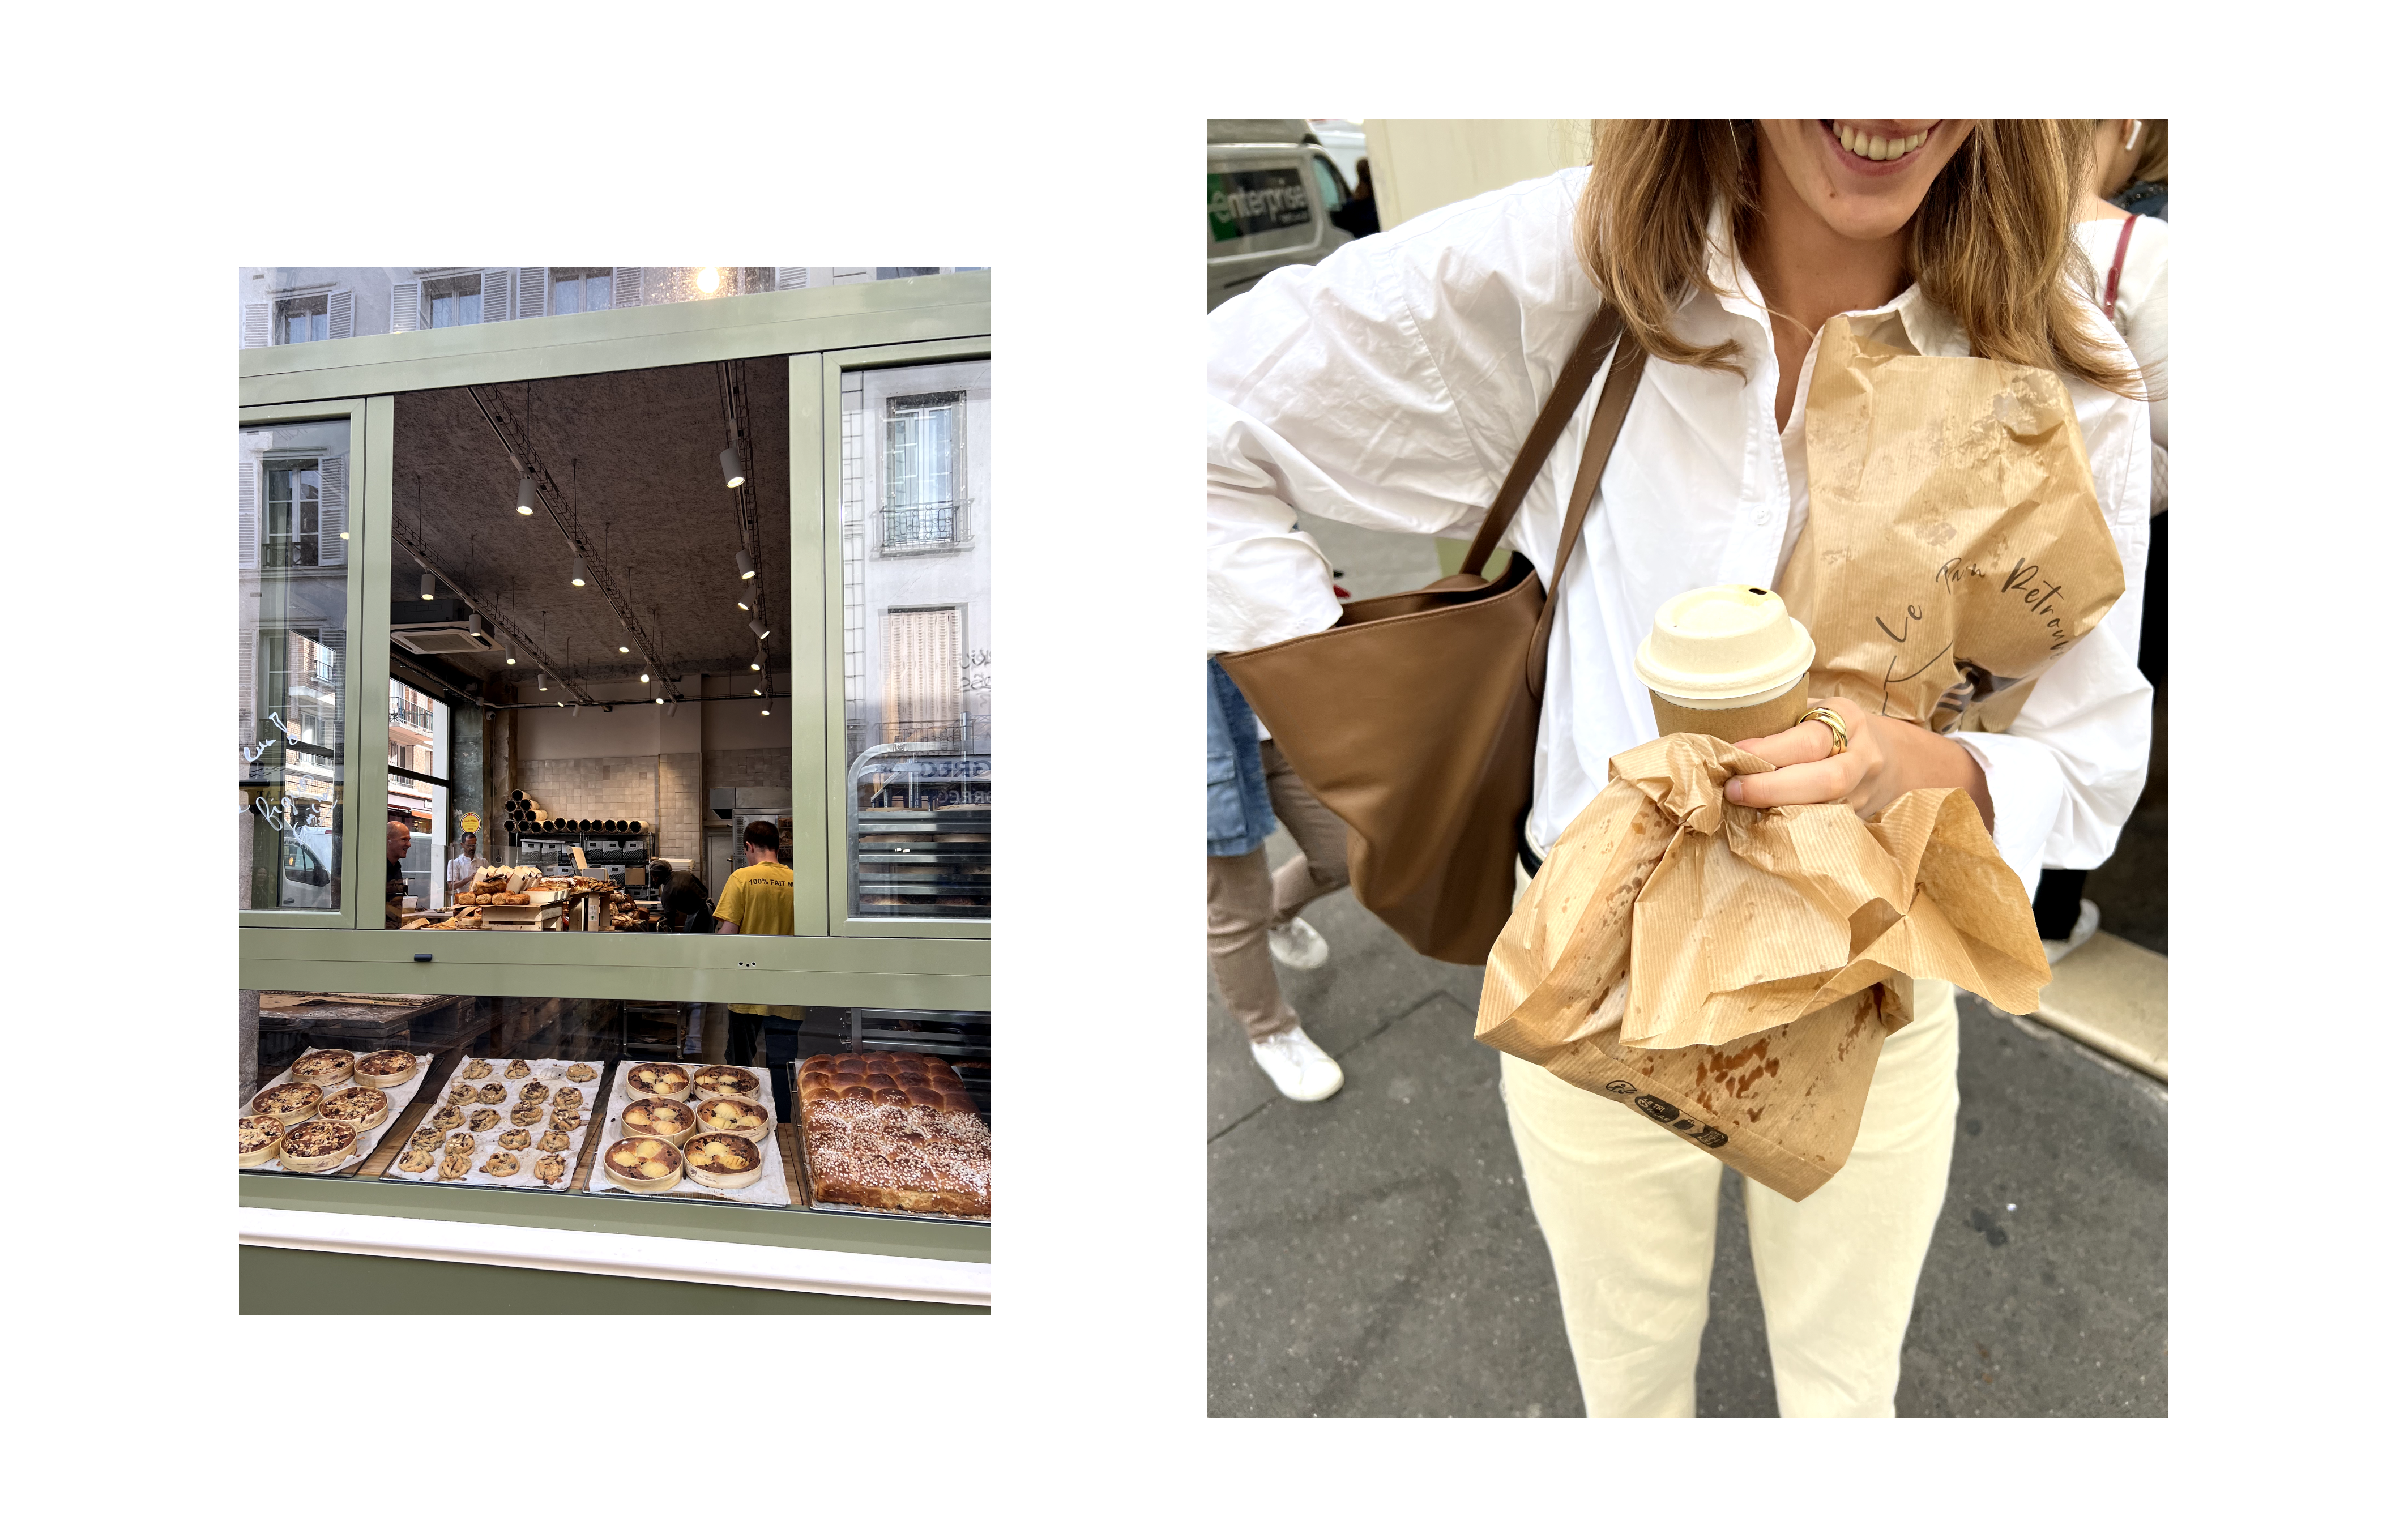 The morning routine that never got questioned: bakery shopping at Le Pain Retrouve 